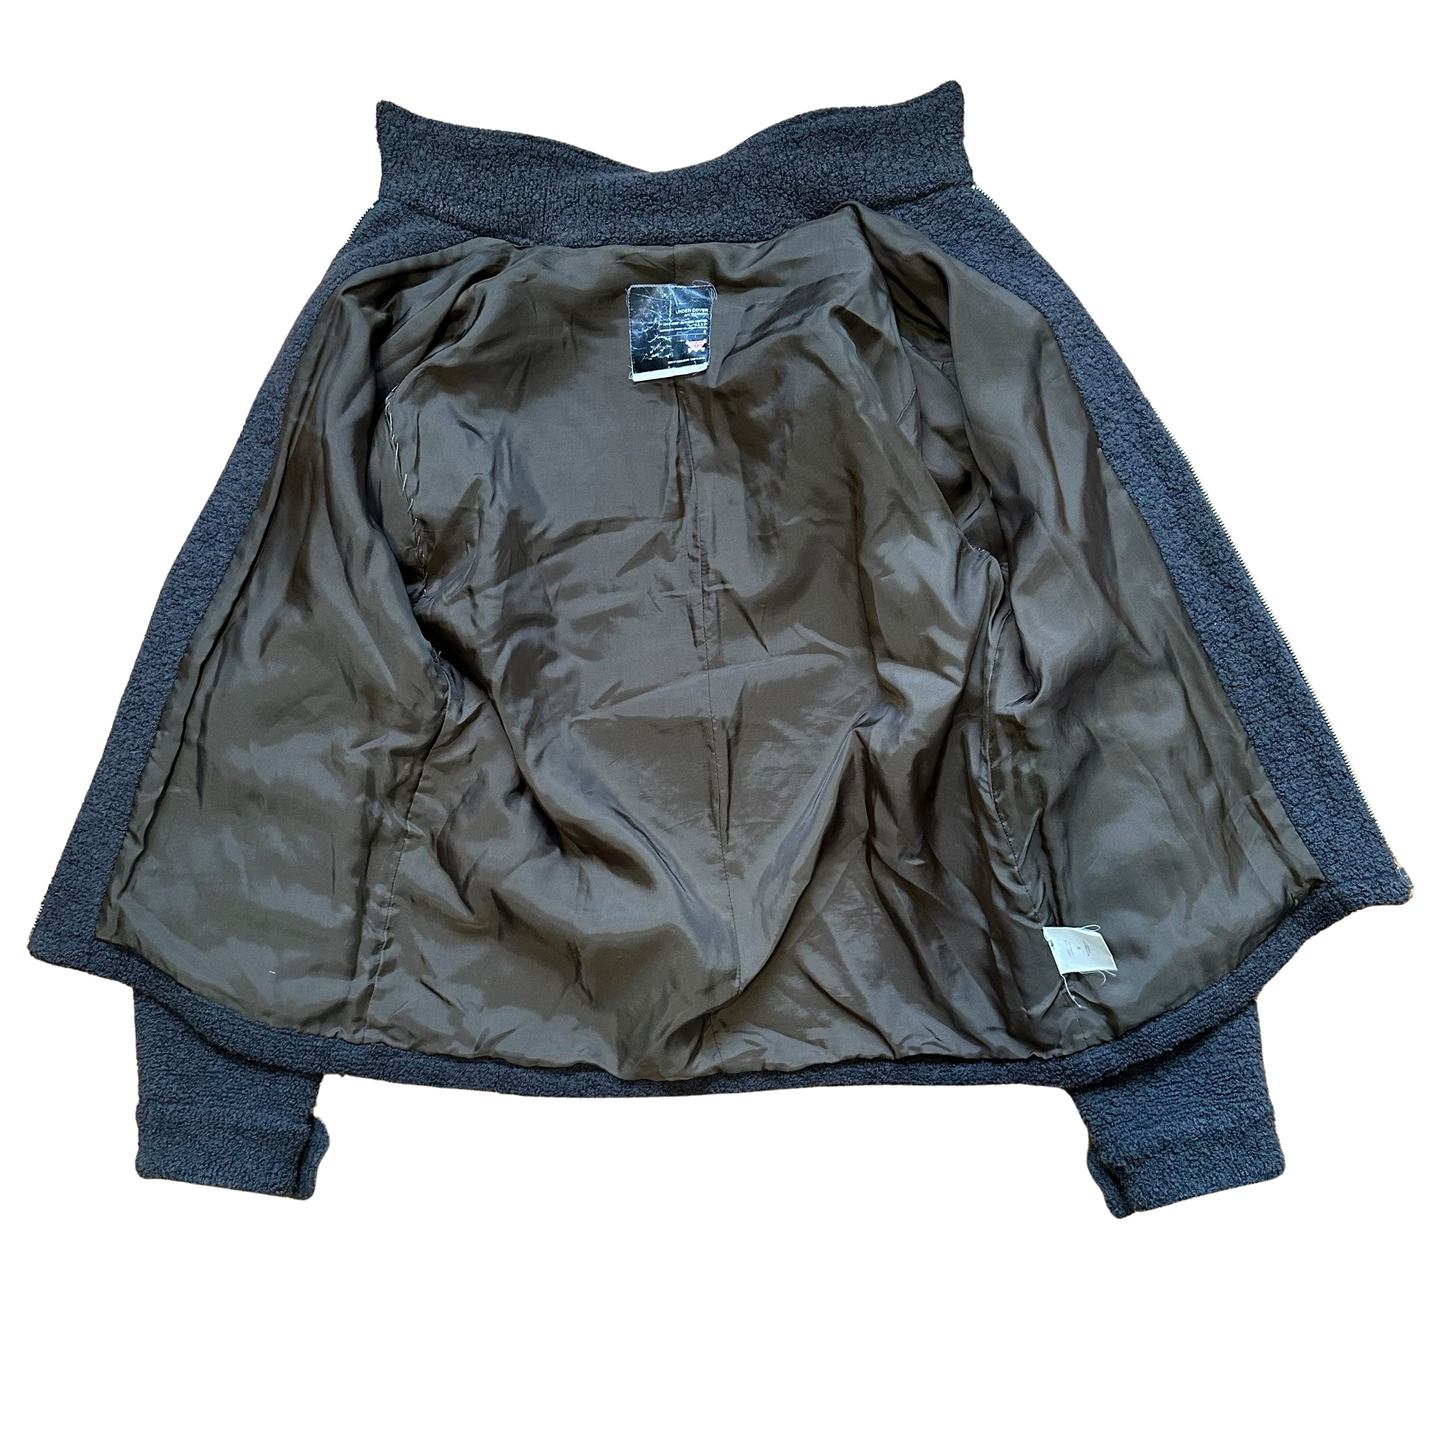 Undercover Terry Cloth Blouson AW01 Large